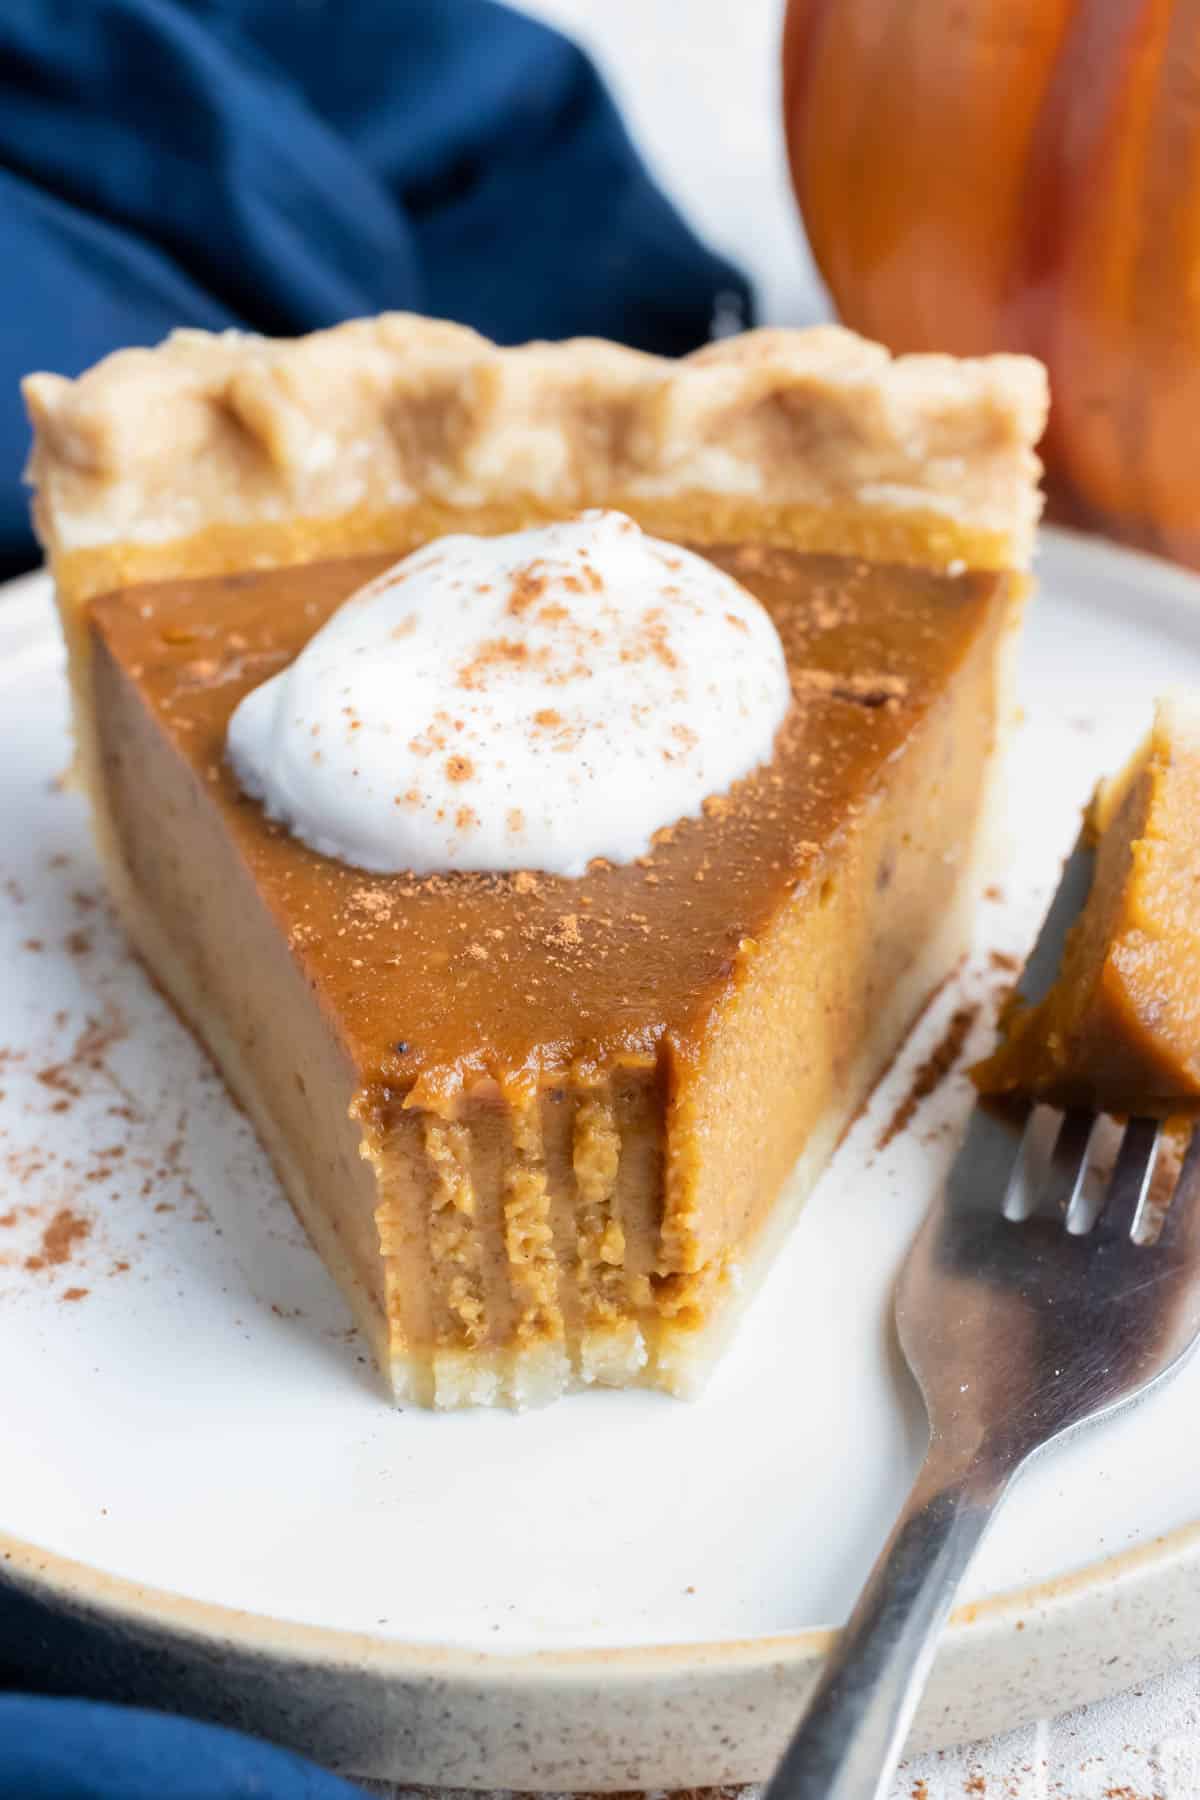 A slice of previously frozen pumpkin pie on a plate with a bite taken out.